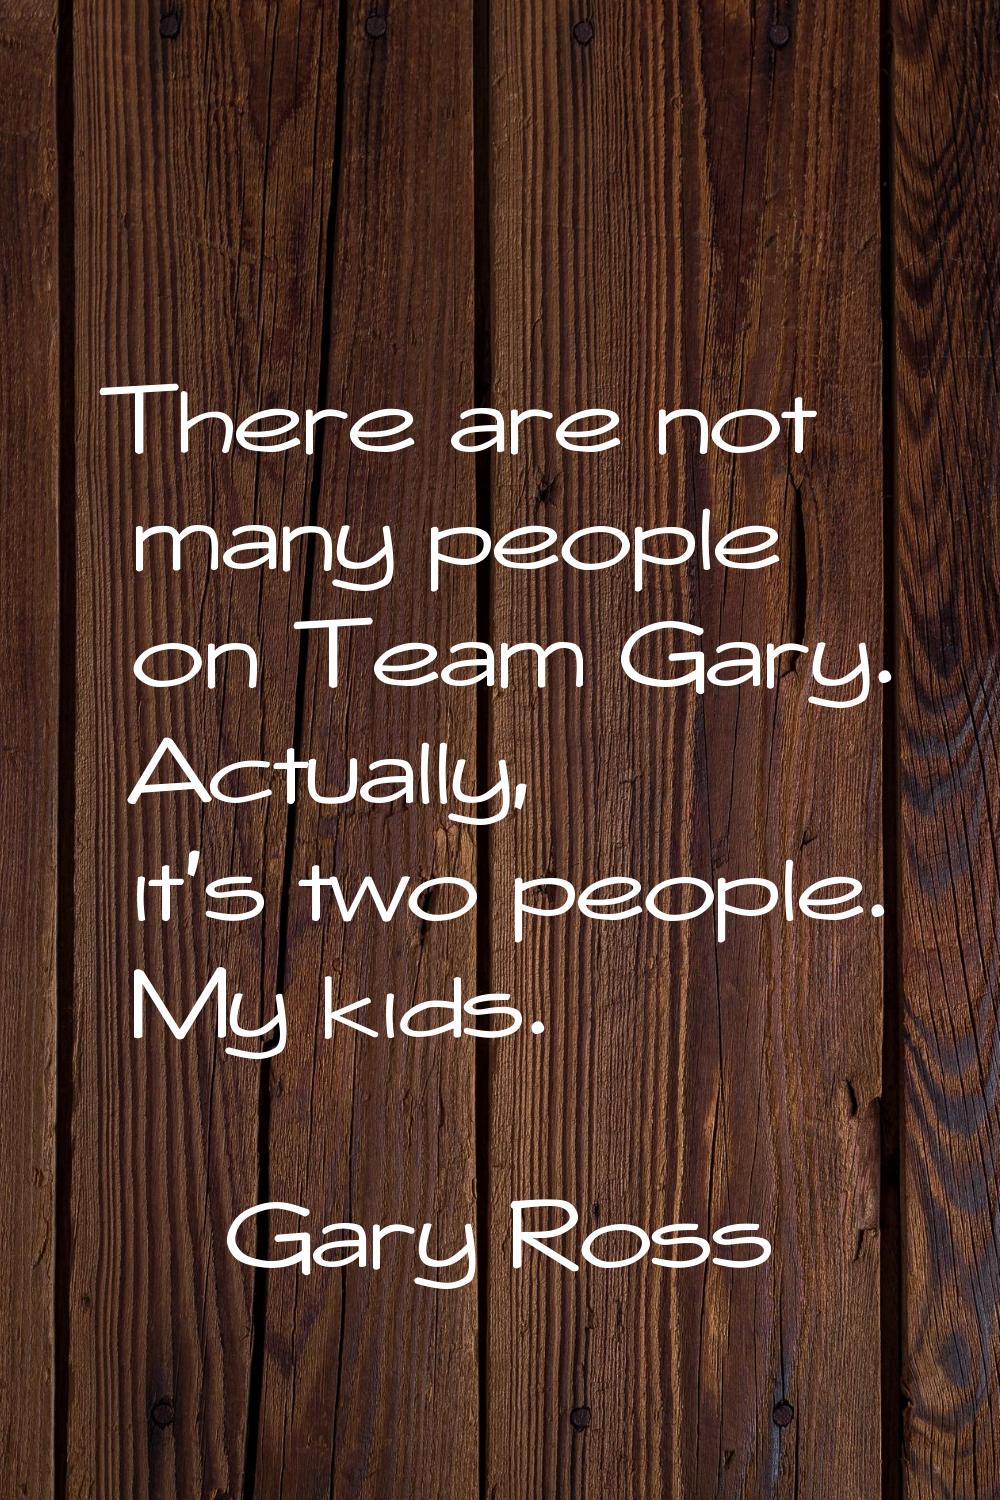 There are not many people on Team Gary. Actually, it's two people. My kids.